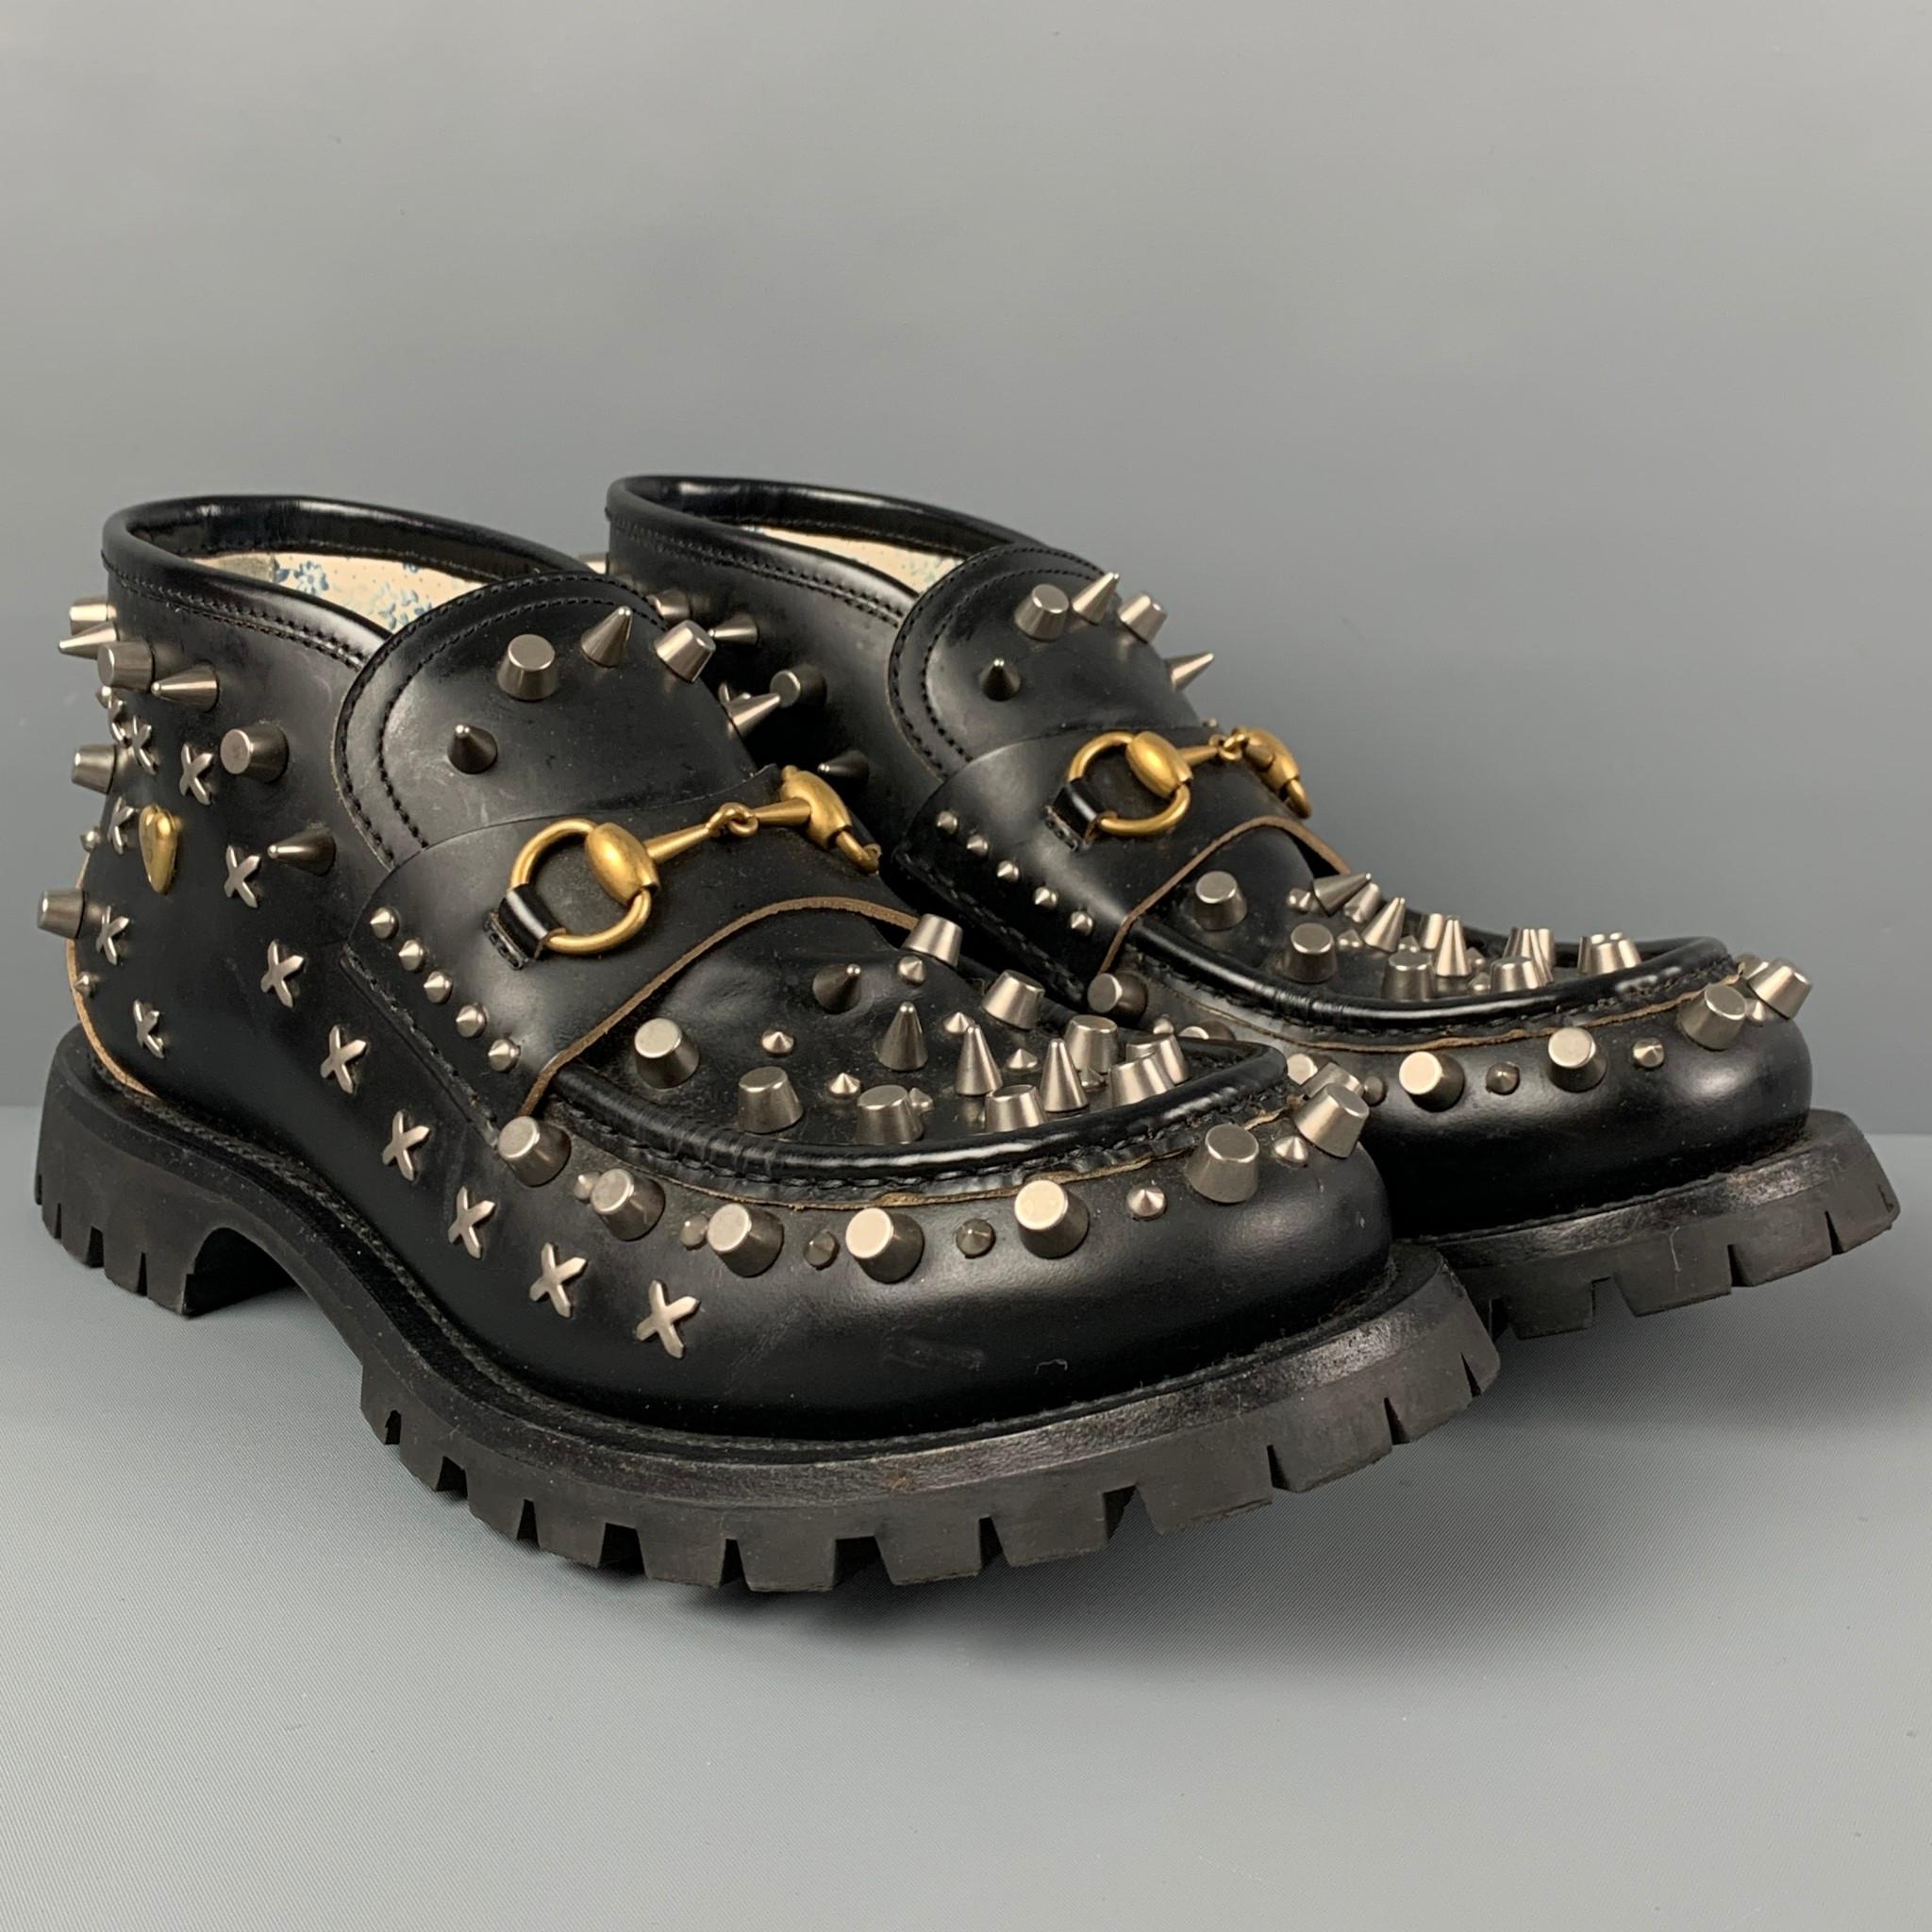 GUCCI boots comes in a black leather featuring signature horsebit detail, studded details, slip on, and a rubber sole. Includes box. Made in Italy. 

Very Good Pre-Owned Condition.
Marked: 547984 9.5 04V
Original Retail Price: